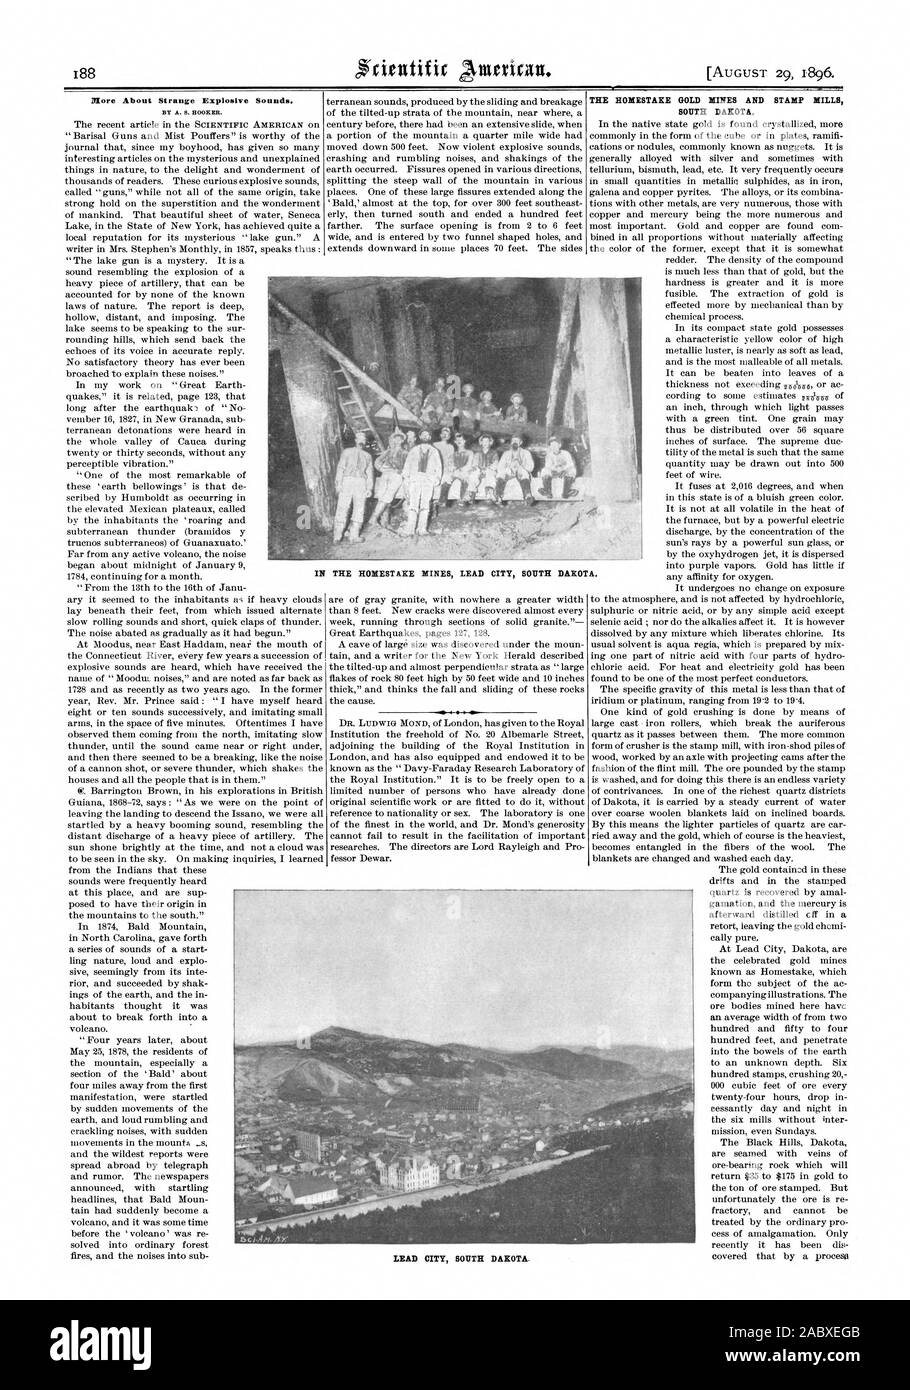 More About Strange Explosive Sounds. THE HOMESTAKE GOLD MINES AND STAMP ?SILLS SOUTH DAKOTA. IN THE HODIESTAKE MINES LEAD CITY SOUTH DAKOTA. oirc. LEAD CITY SOUTH DAKOTA., scientific american, 1896-08-29 Stock Photo